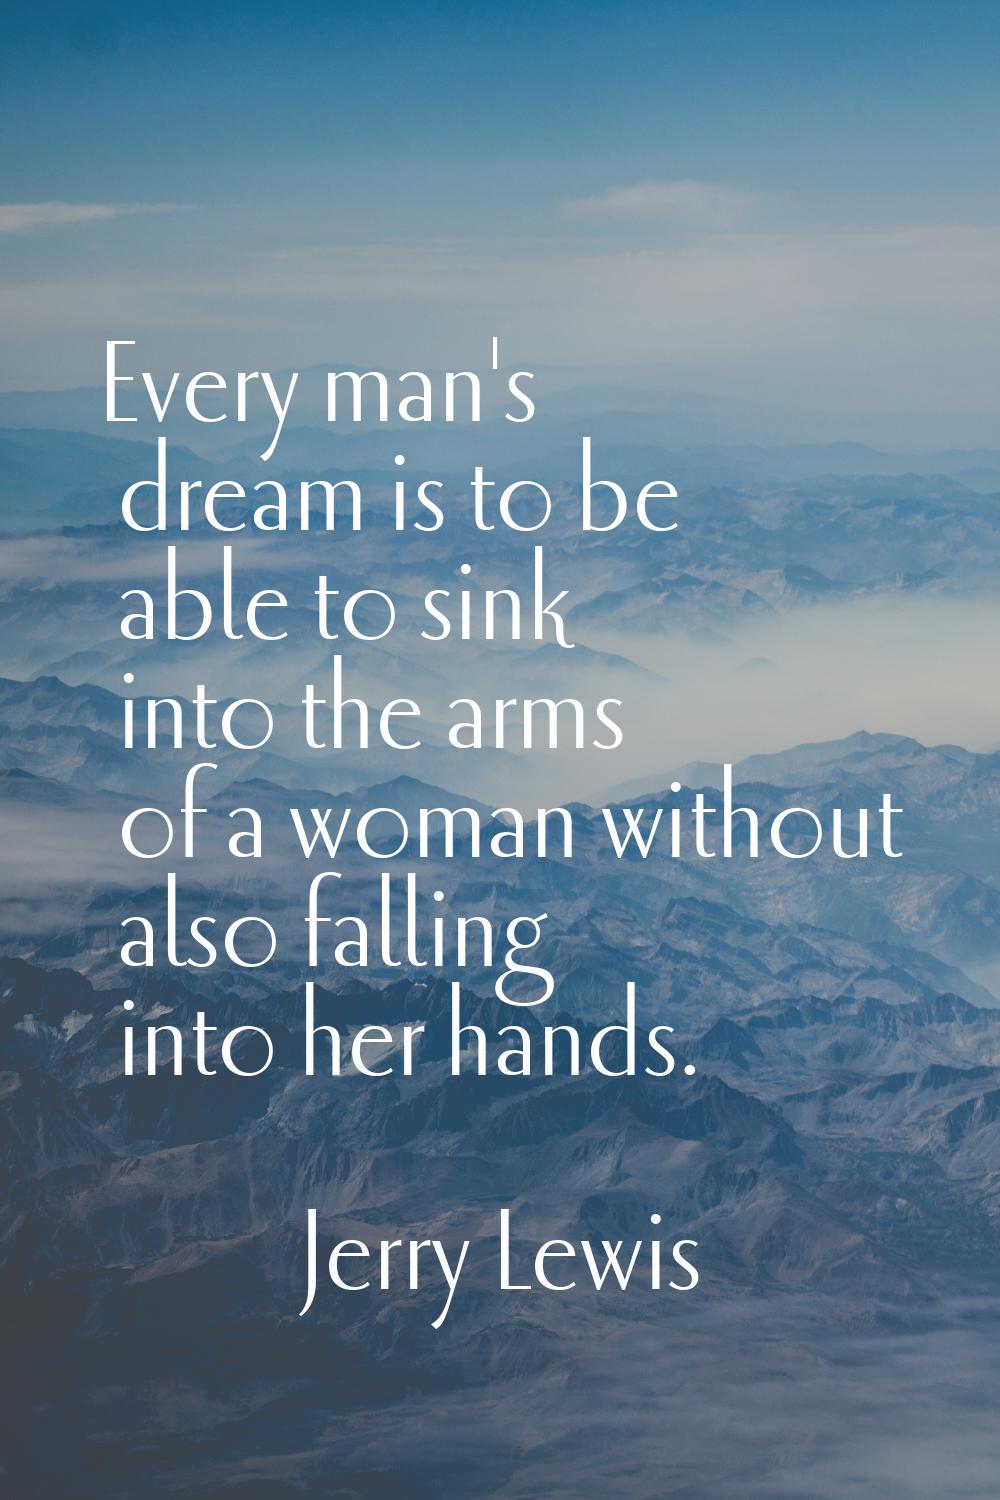 Every man's dream is to be able to sink into the arms of a woman without also falling into her hand